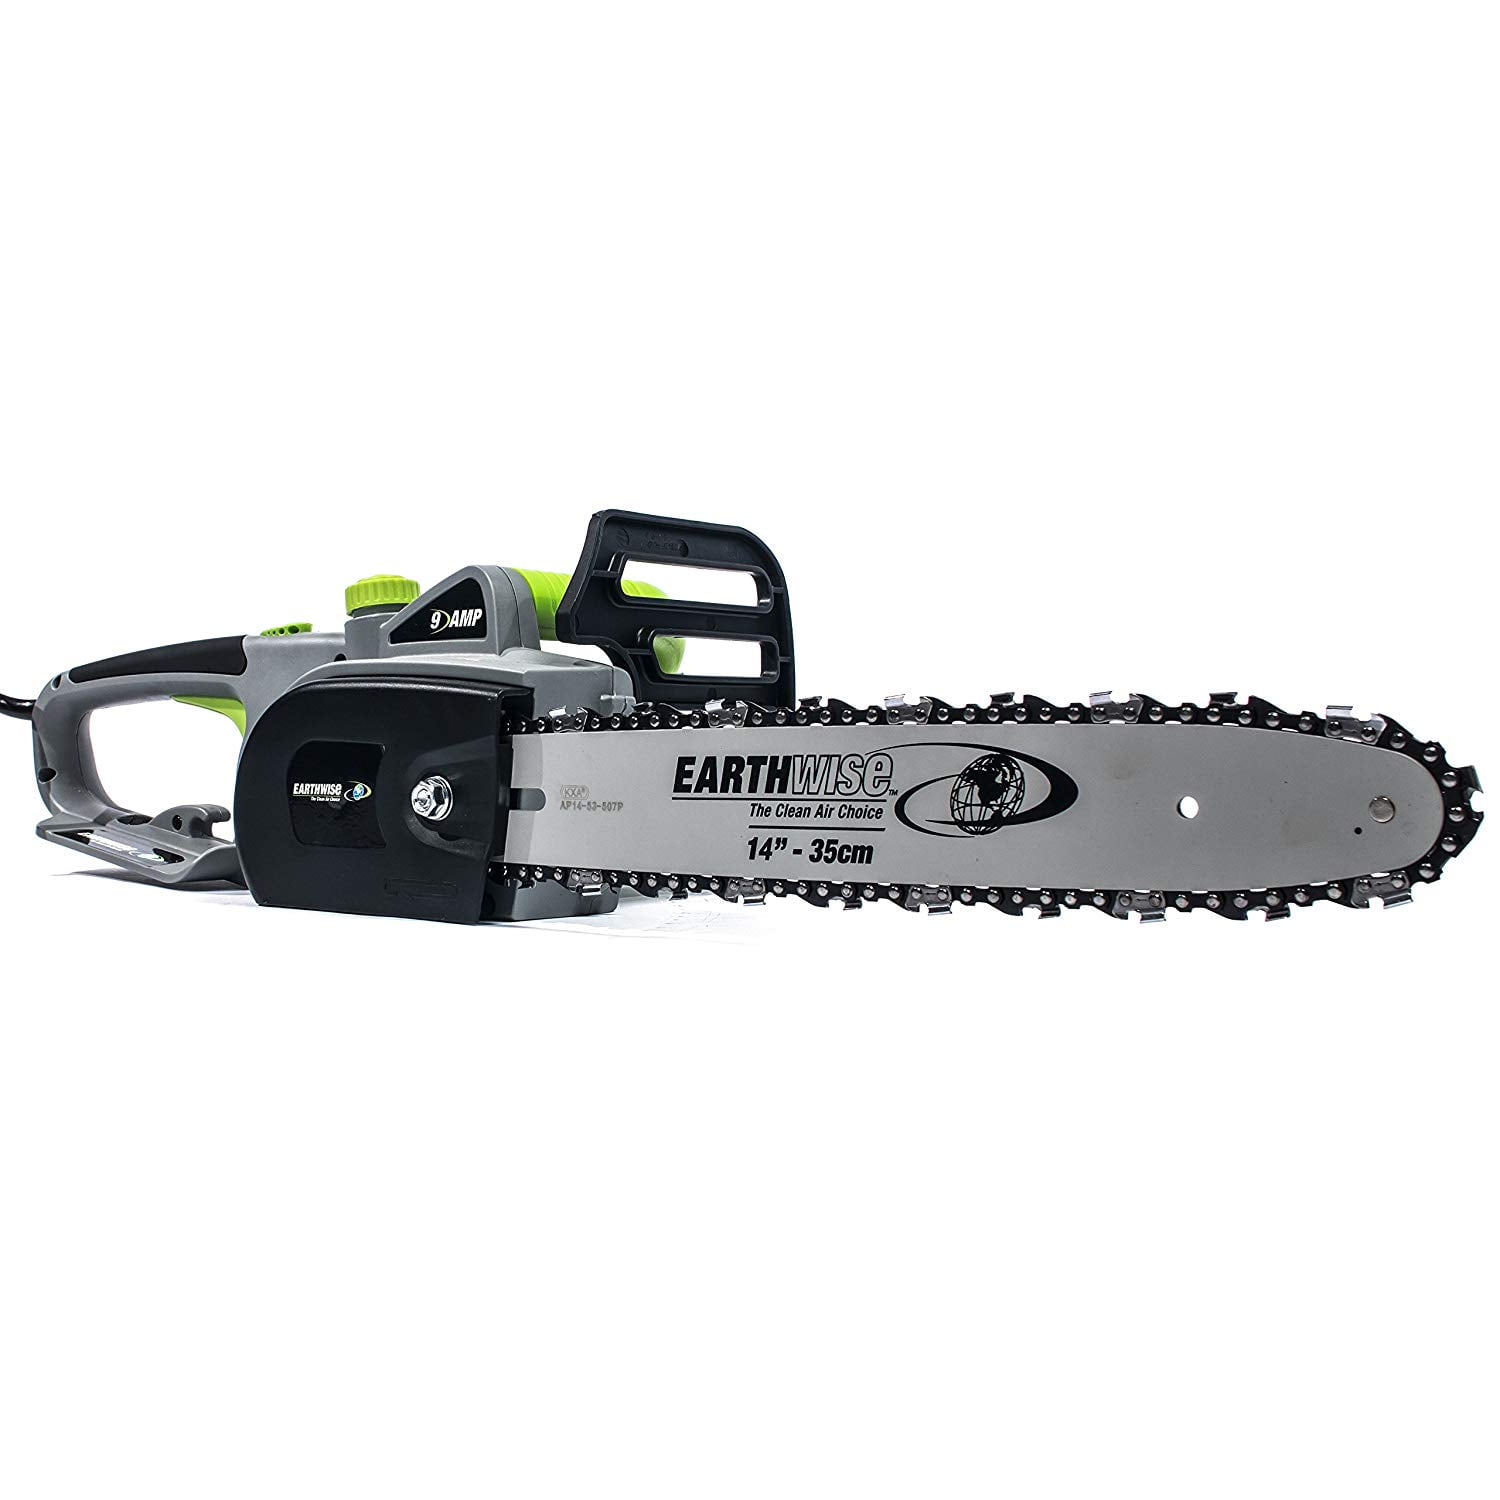  Greenworks 40V 16 Brushless Cordless Chainsaw (Great For Tree  Felling, Limbing, Pruning, and Firewood / 75+ Compatible Tools), 4.0Ah  Battery and Charger Included : Power Chain Saws : Patio, Lawn & Garden